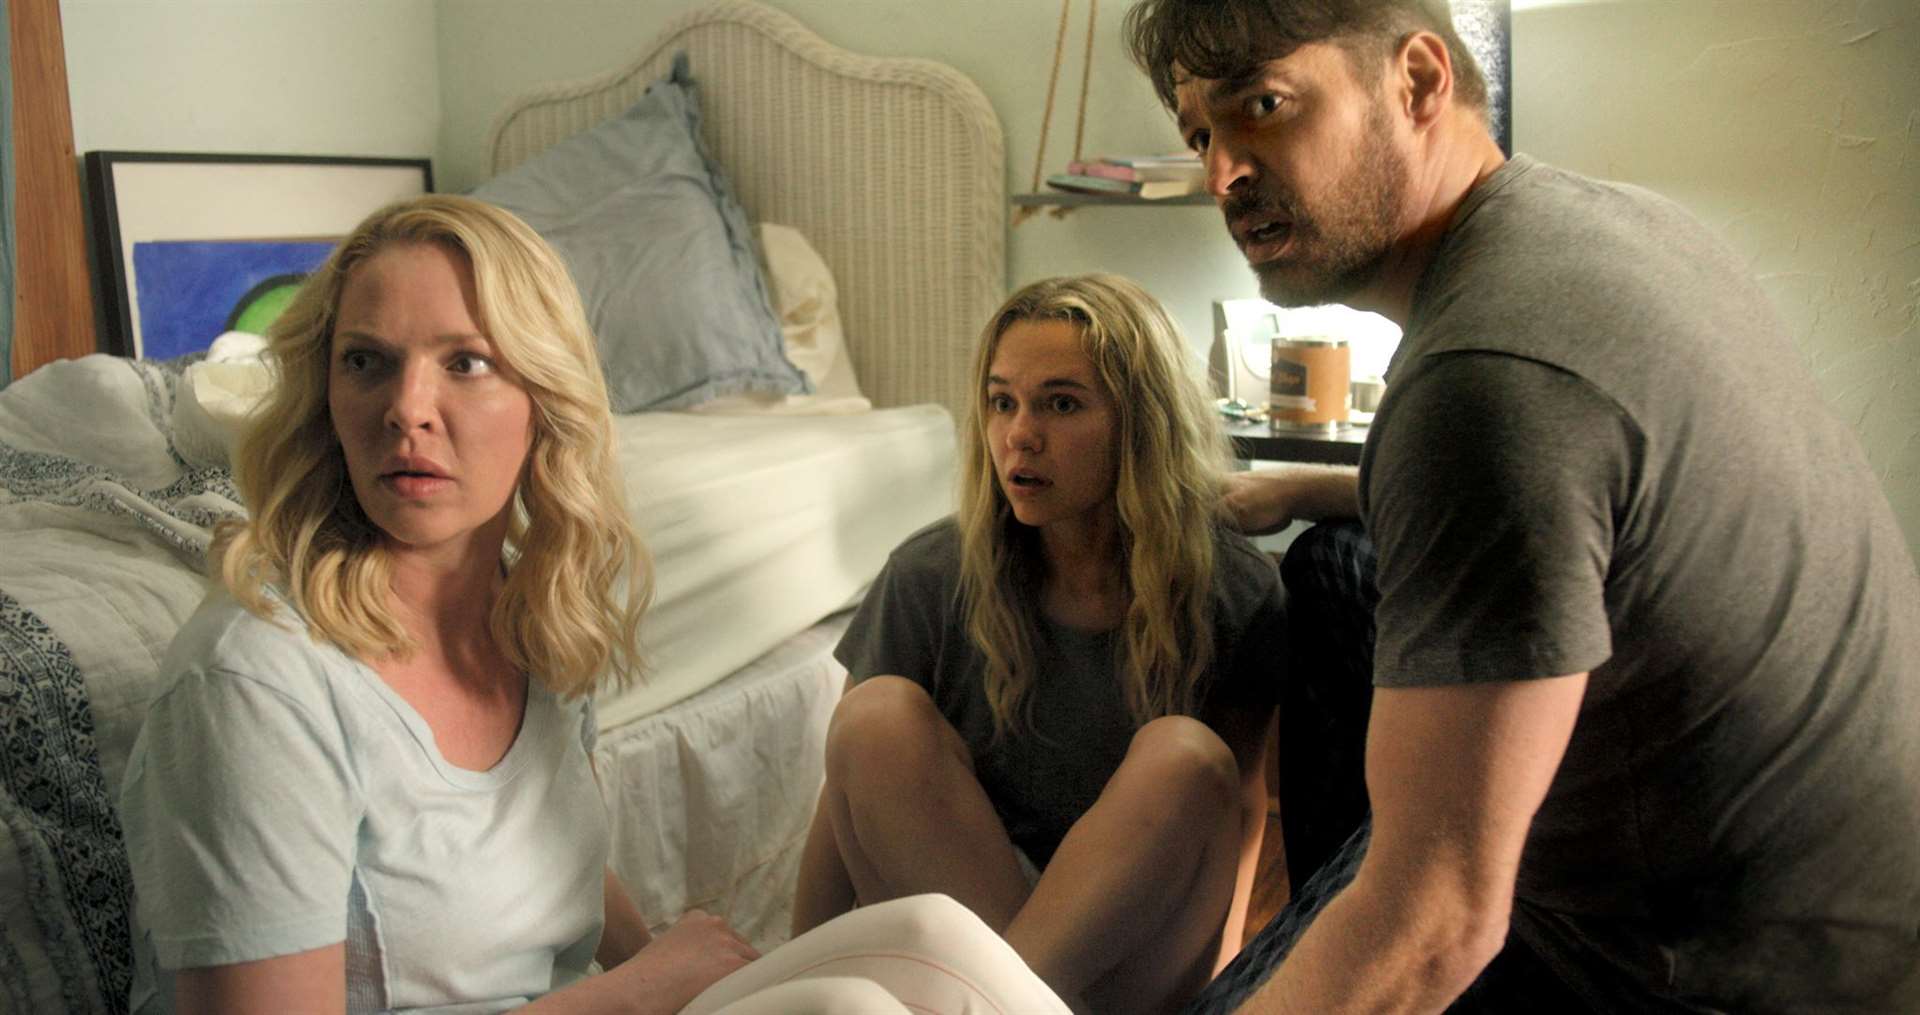 Katherine Heigl as Michelle Burroughs, Madison Iseman as Rain Burroughs and Harry Connick Jr as John Burroughs in Fear of Rain. Picture: PA Photo/Signature Entertainment.